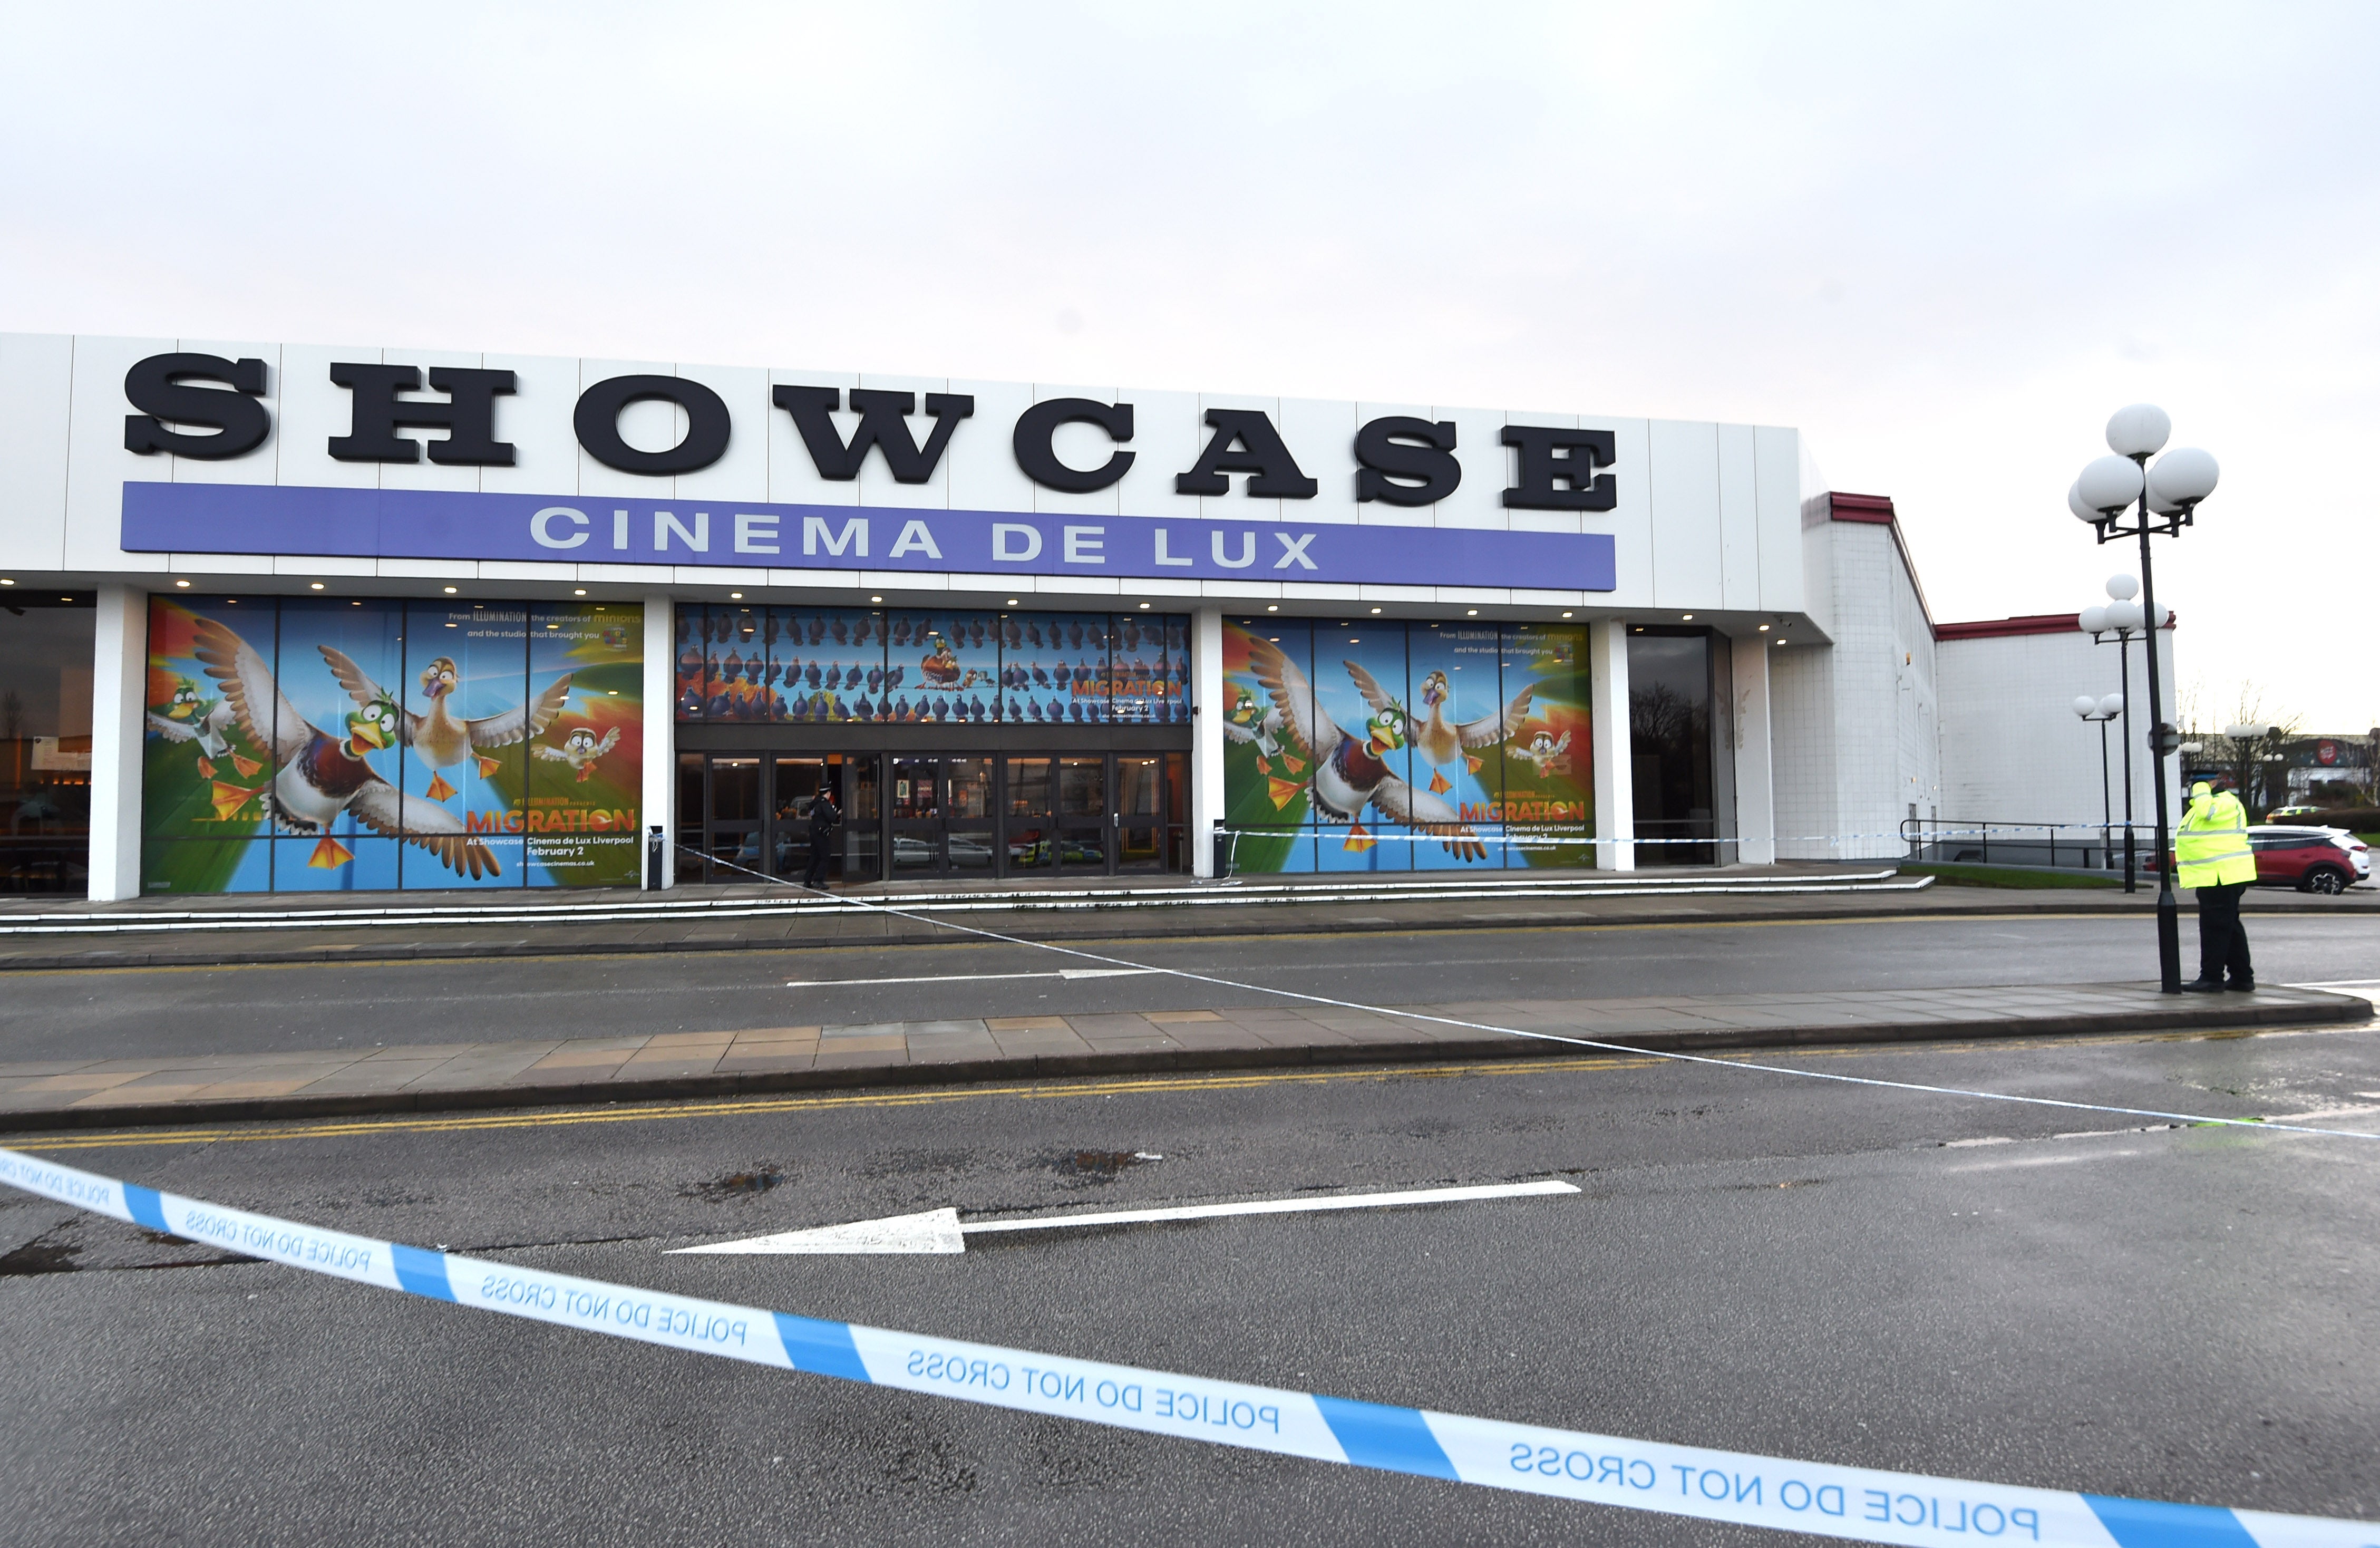 At 8.50pm, police received a second report of shots being fired at Showcase Cinemas after a man entered carrying a firearm